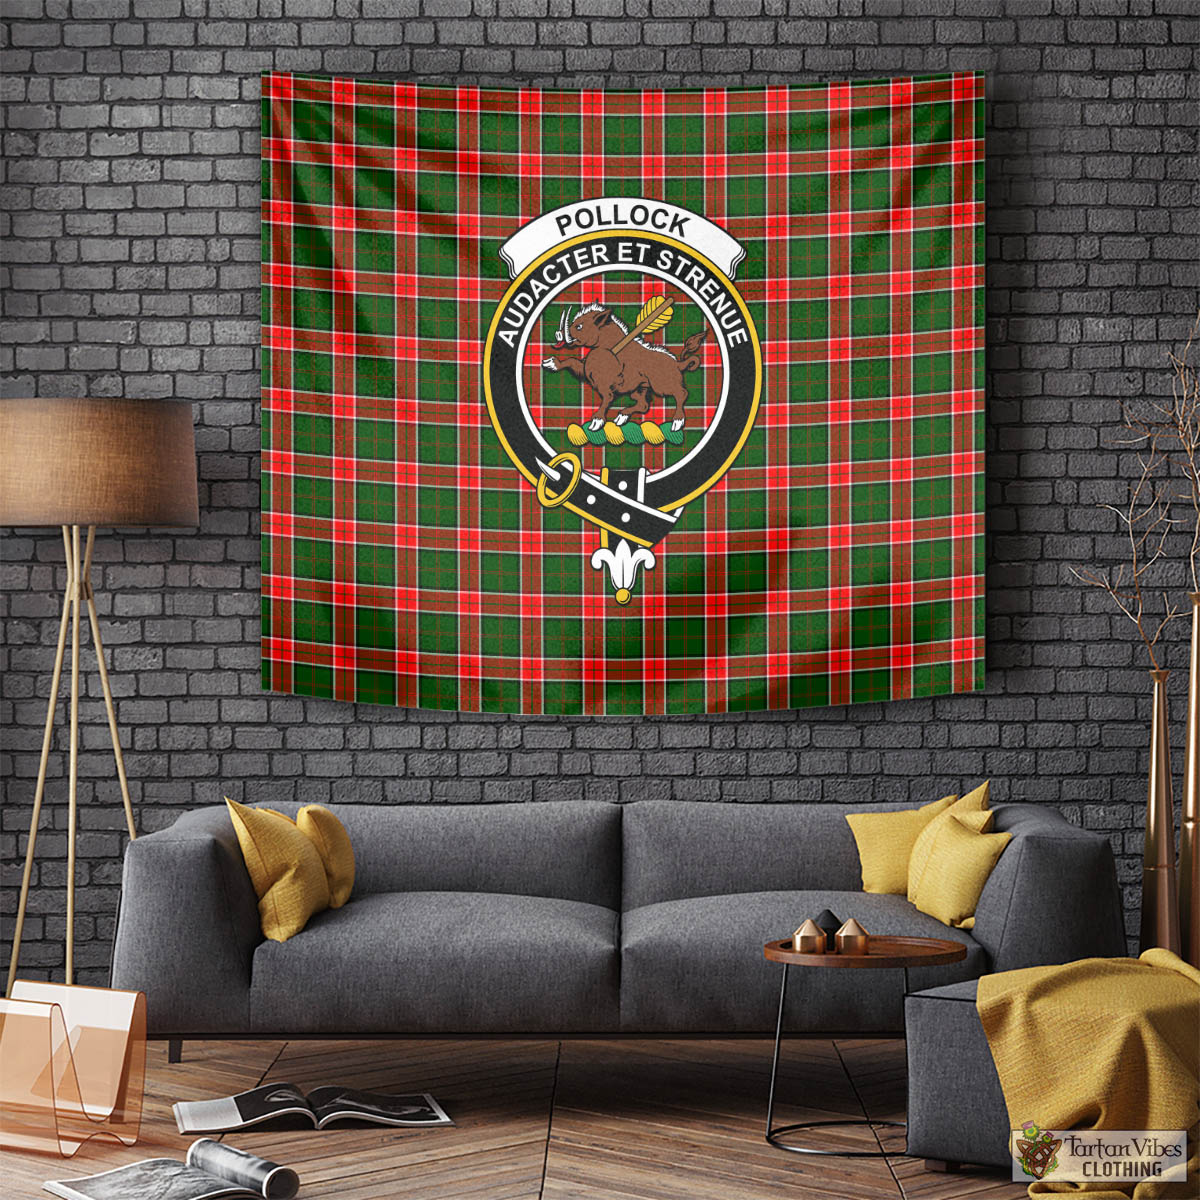 Tartan Vibes Clothing Pollock Modern Tartan Tapestry Wall Hanging and Home Decor for Room with Family Crest